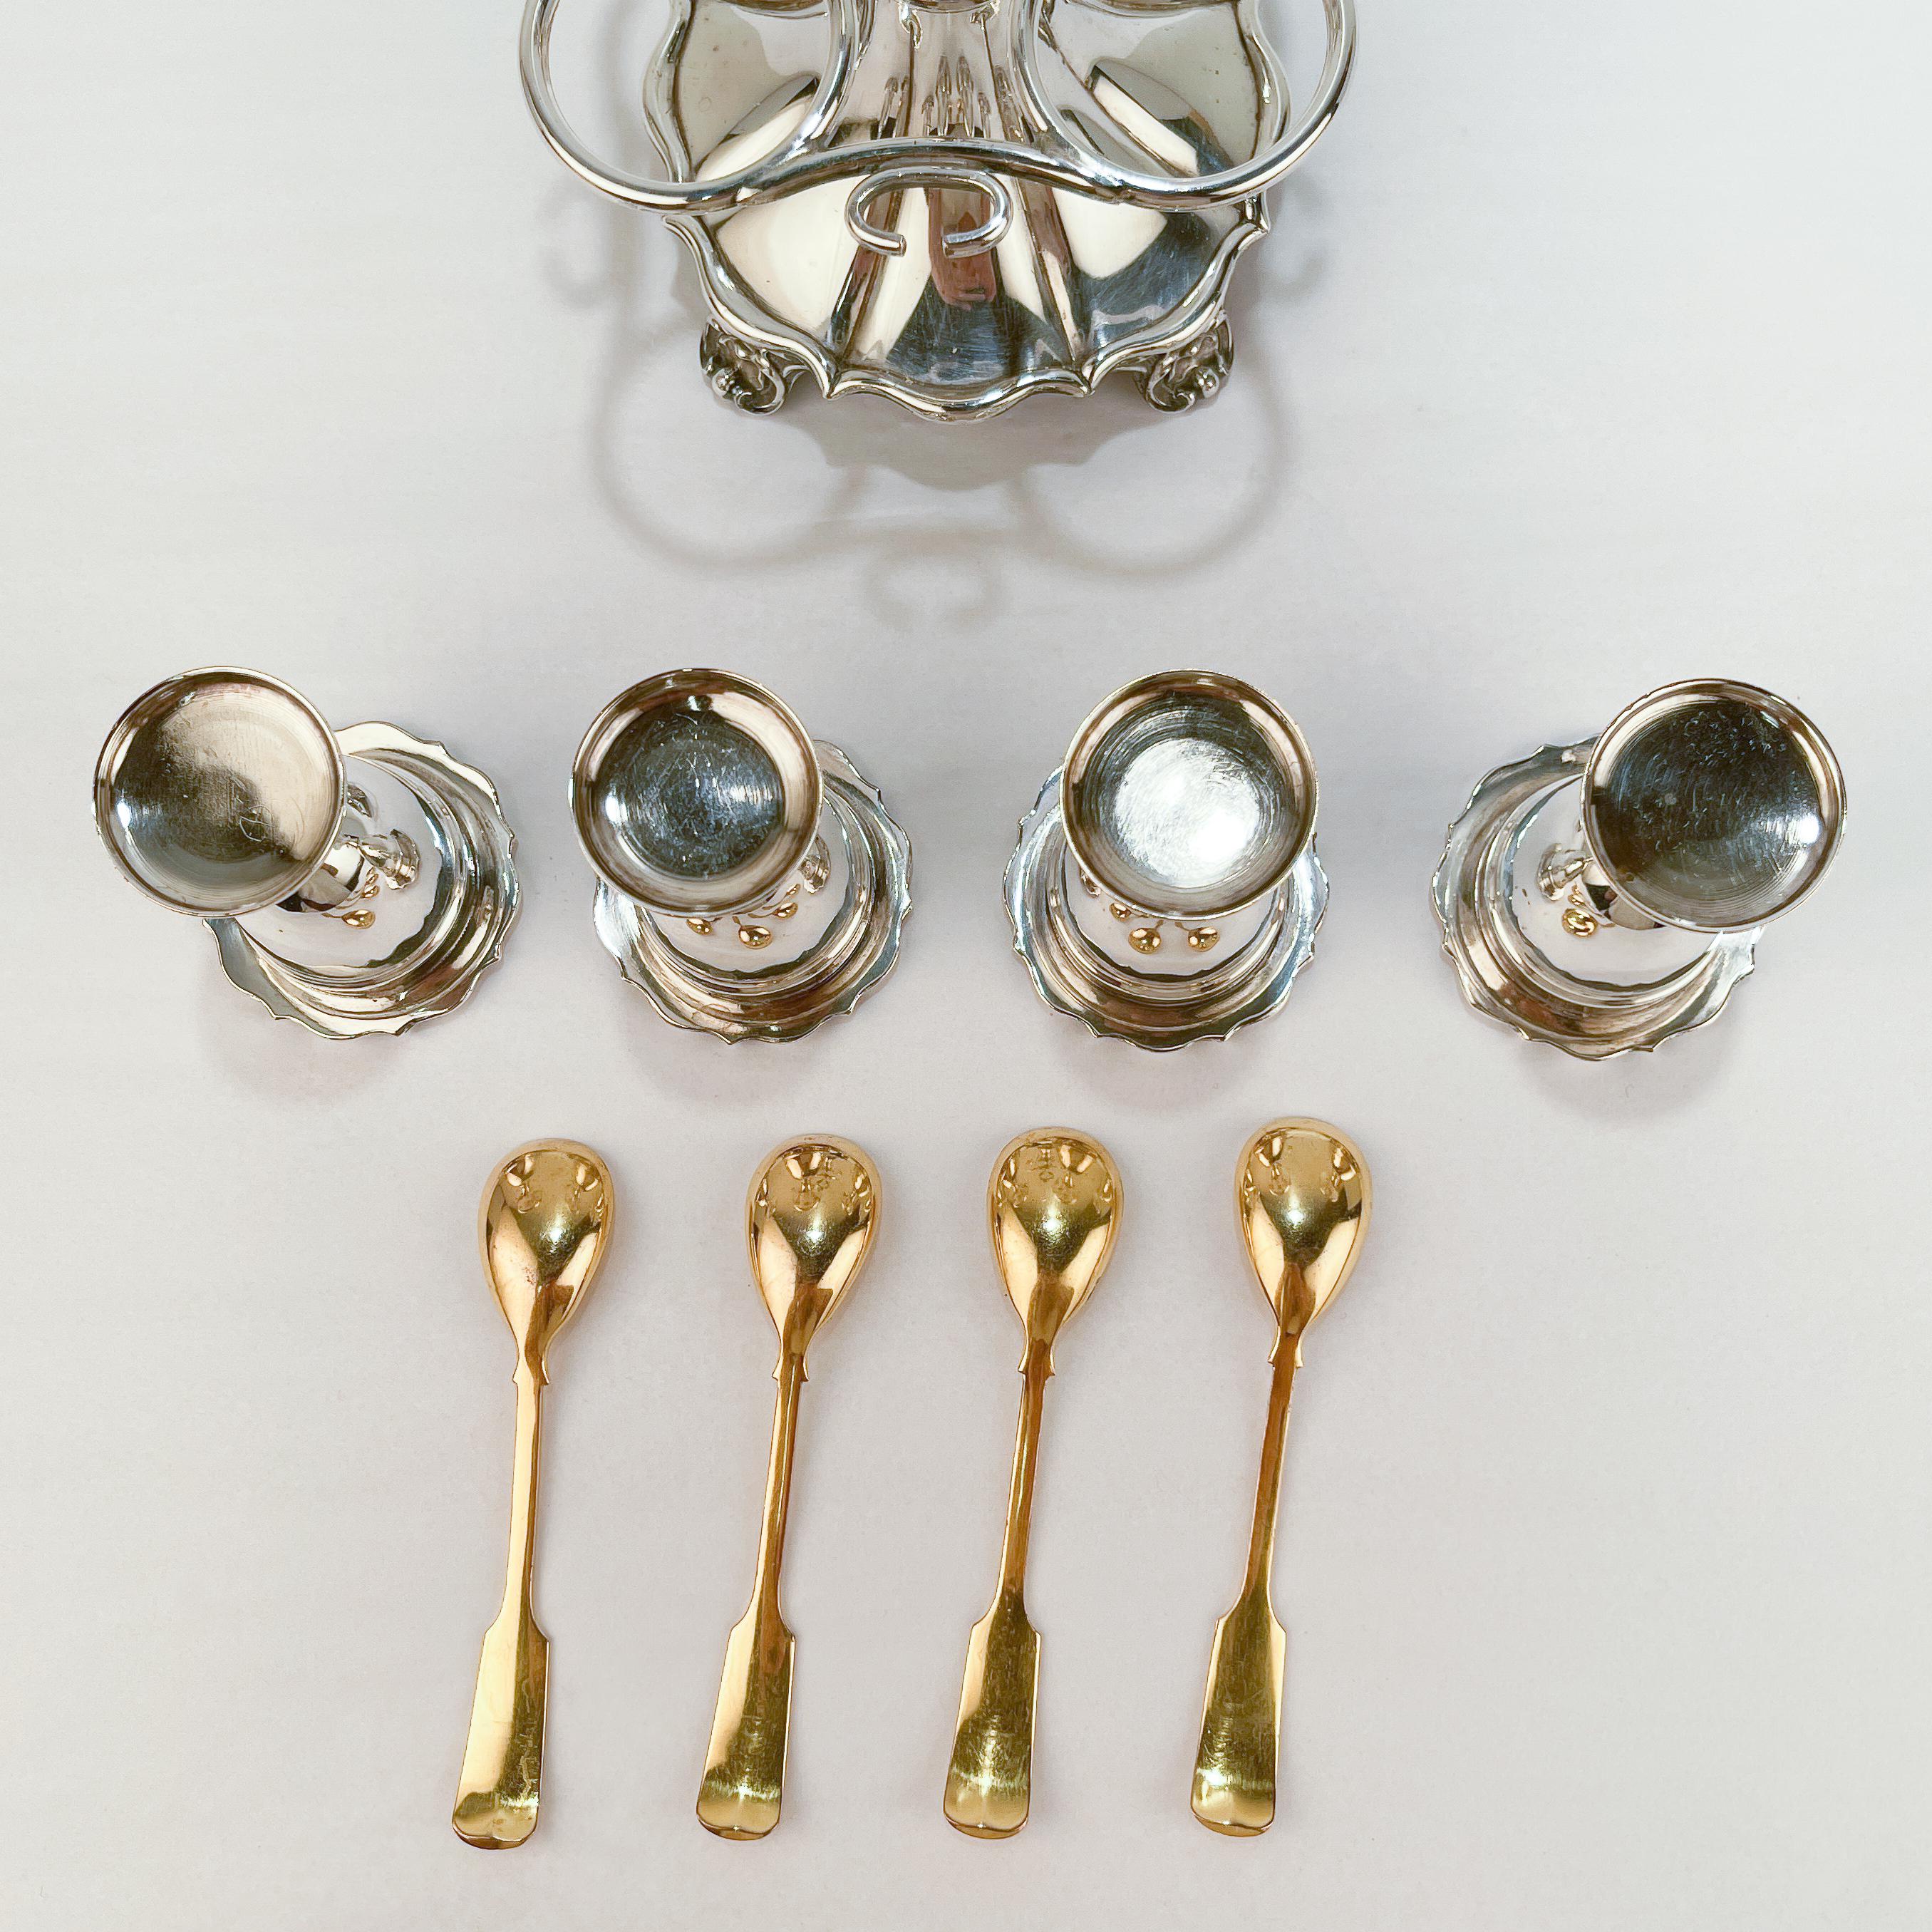 Antique 19th Century English Silver Plated Egg Cups and Stand For Sale 5